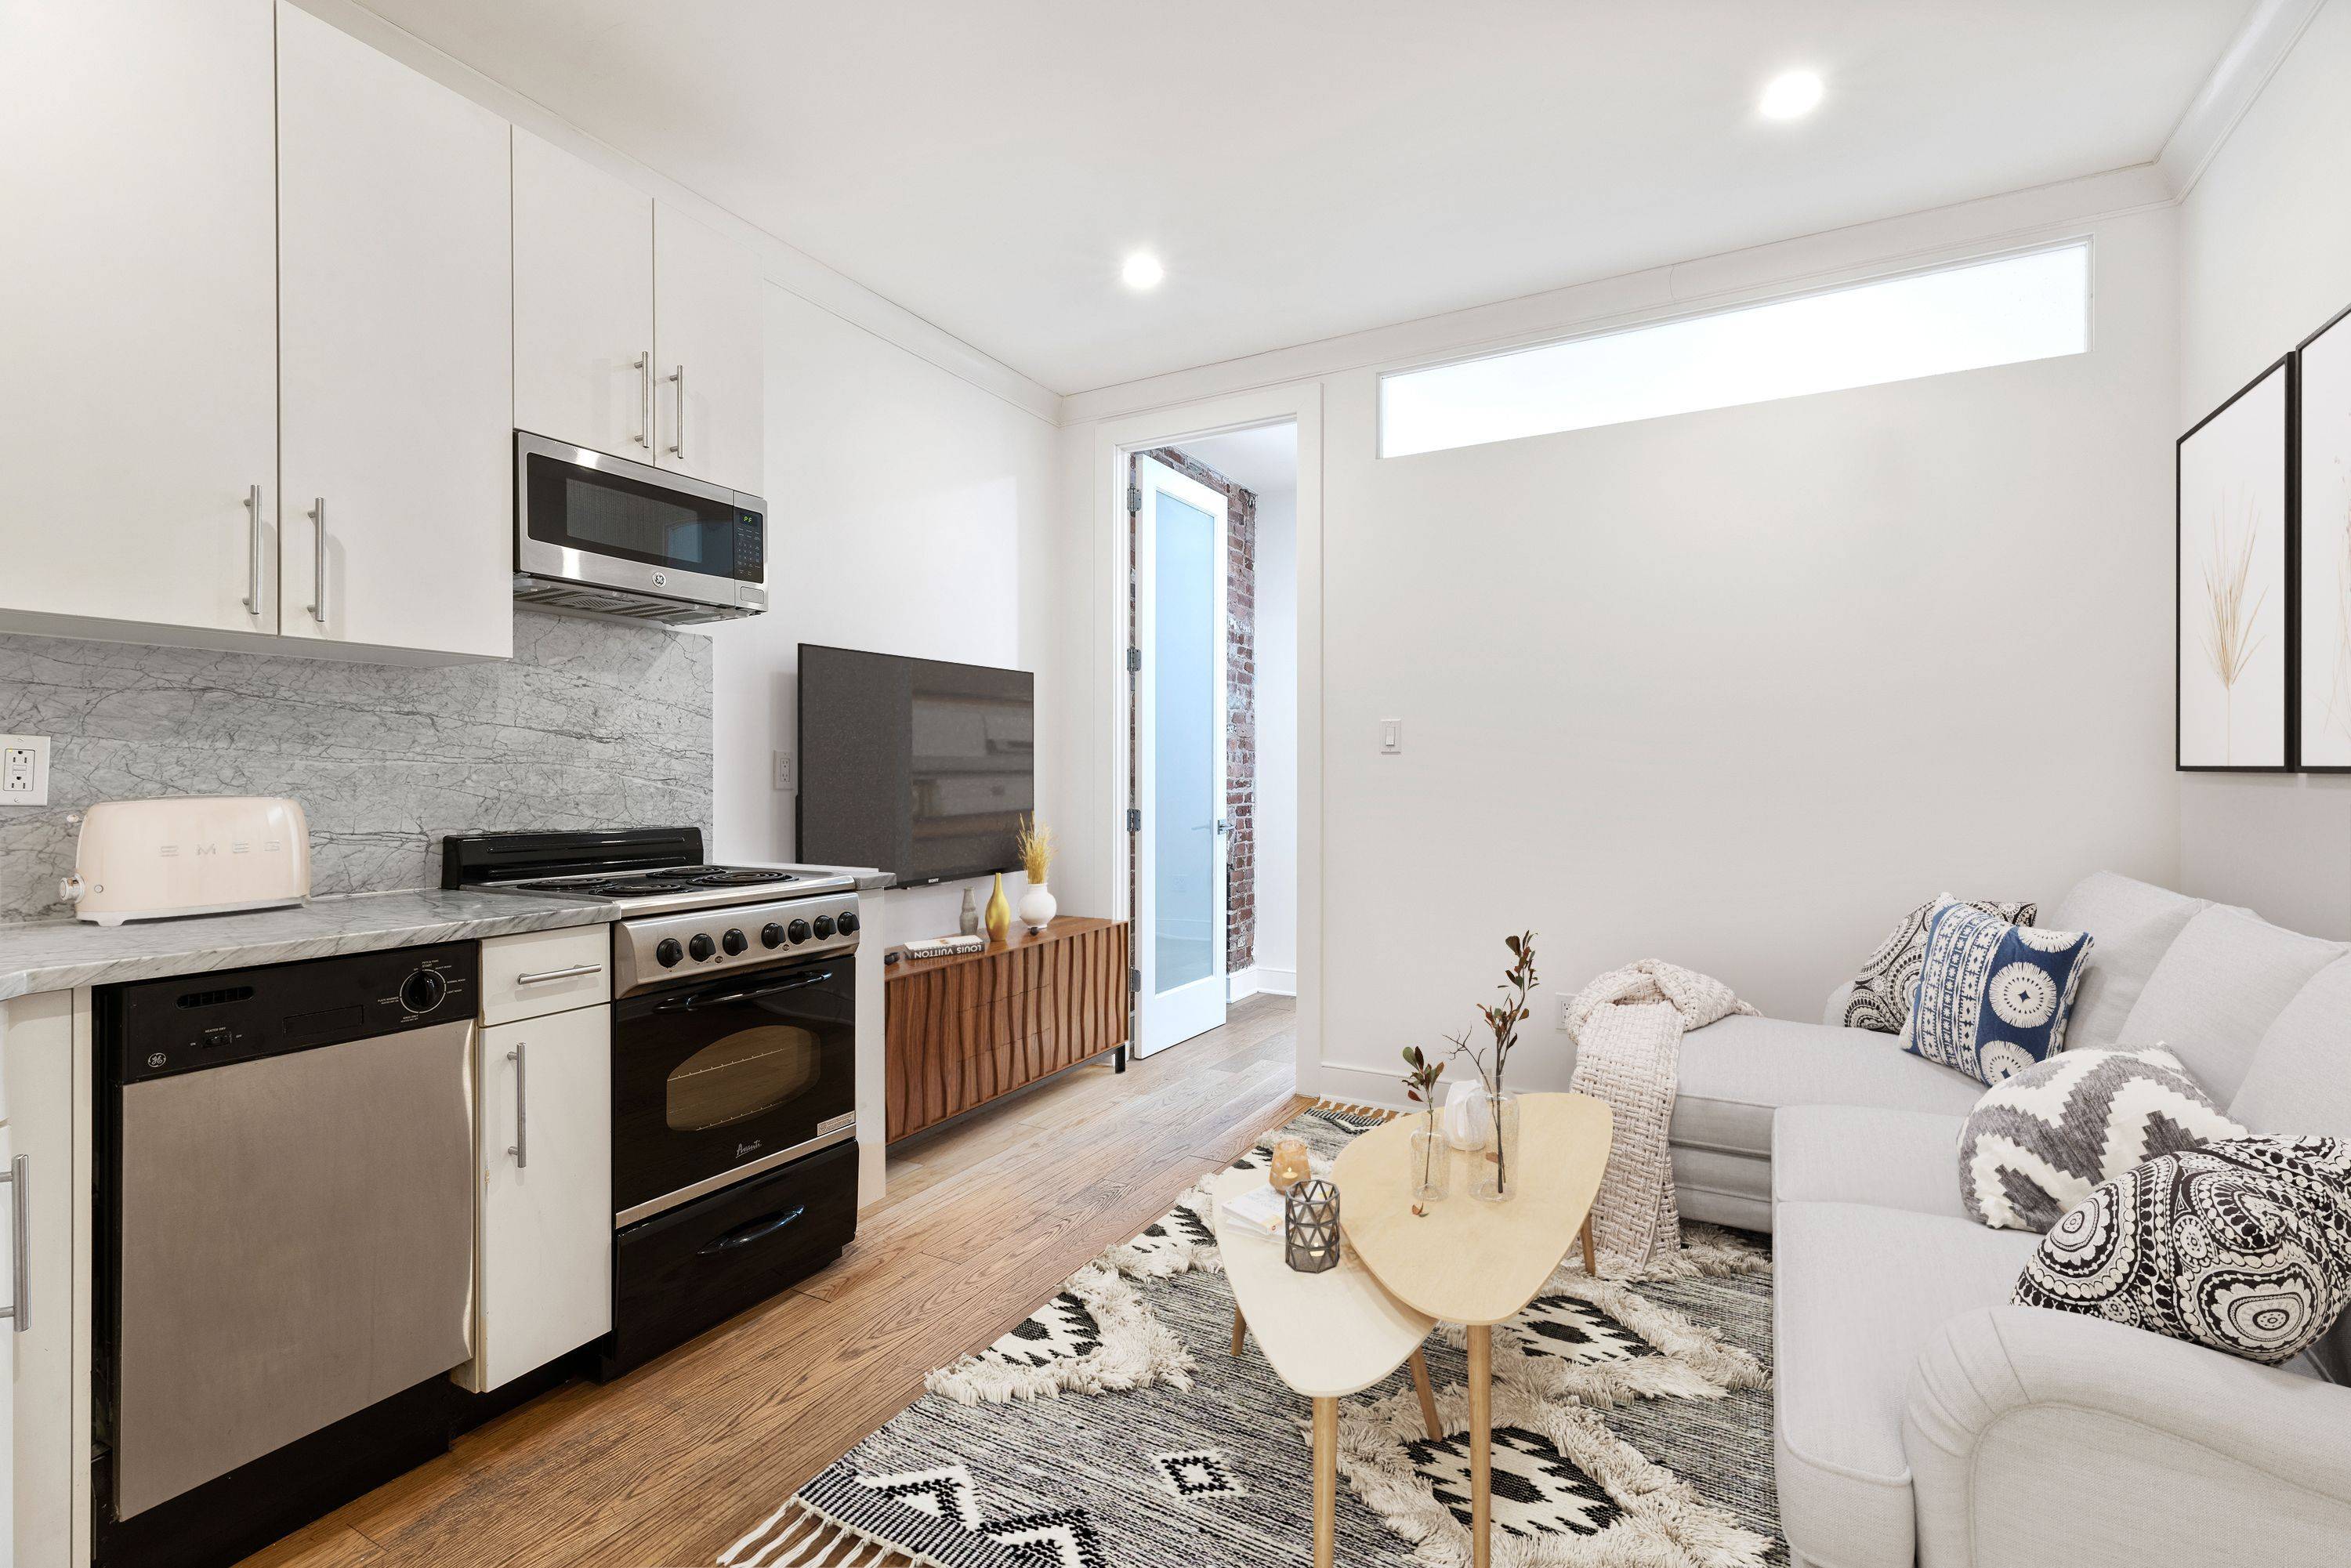 2 Queen sized bedrooms, 1 full bath residence featuring stainless steel appliances, granite countertops, designer details, renovated marble bathrooms with Kohler fixtures and a personal video intercom system.